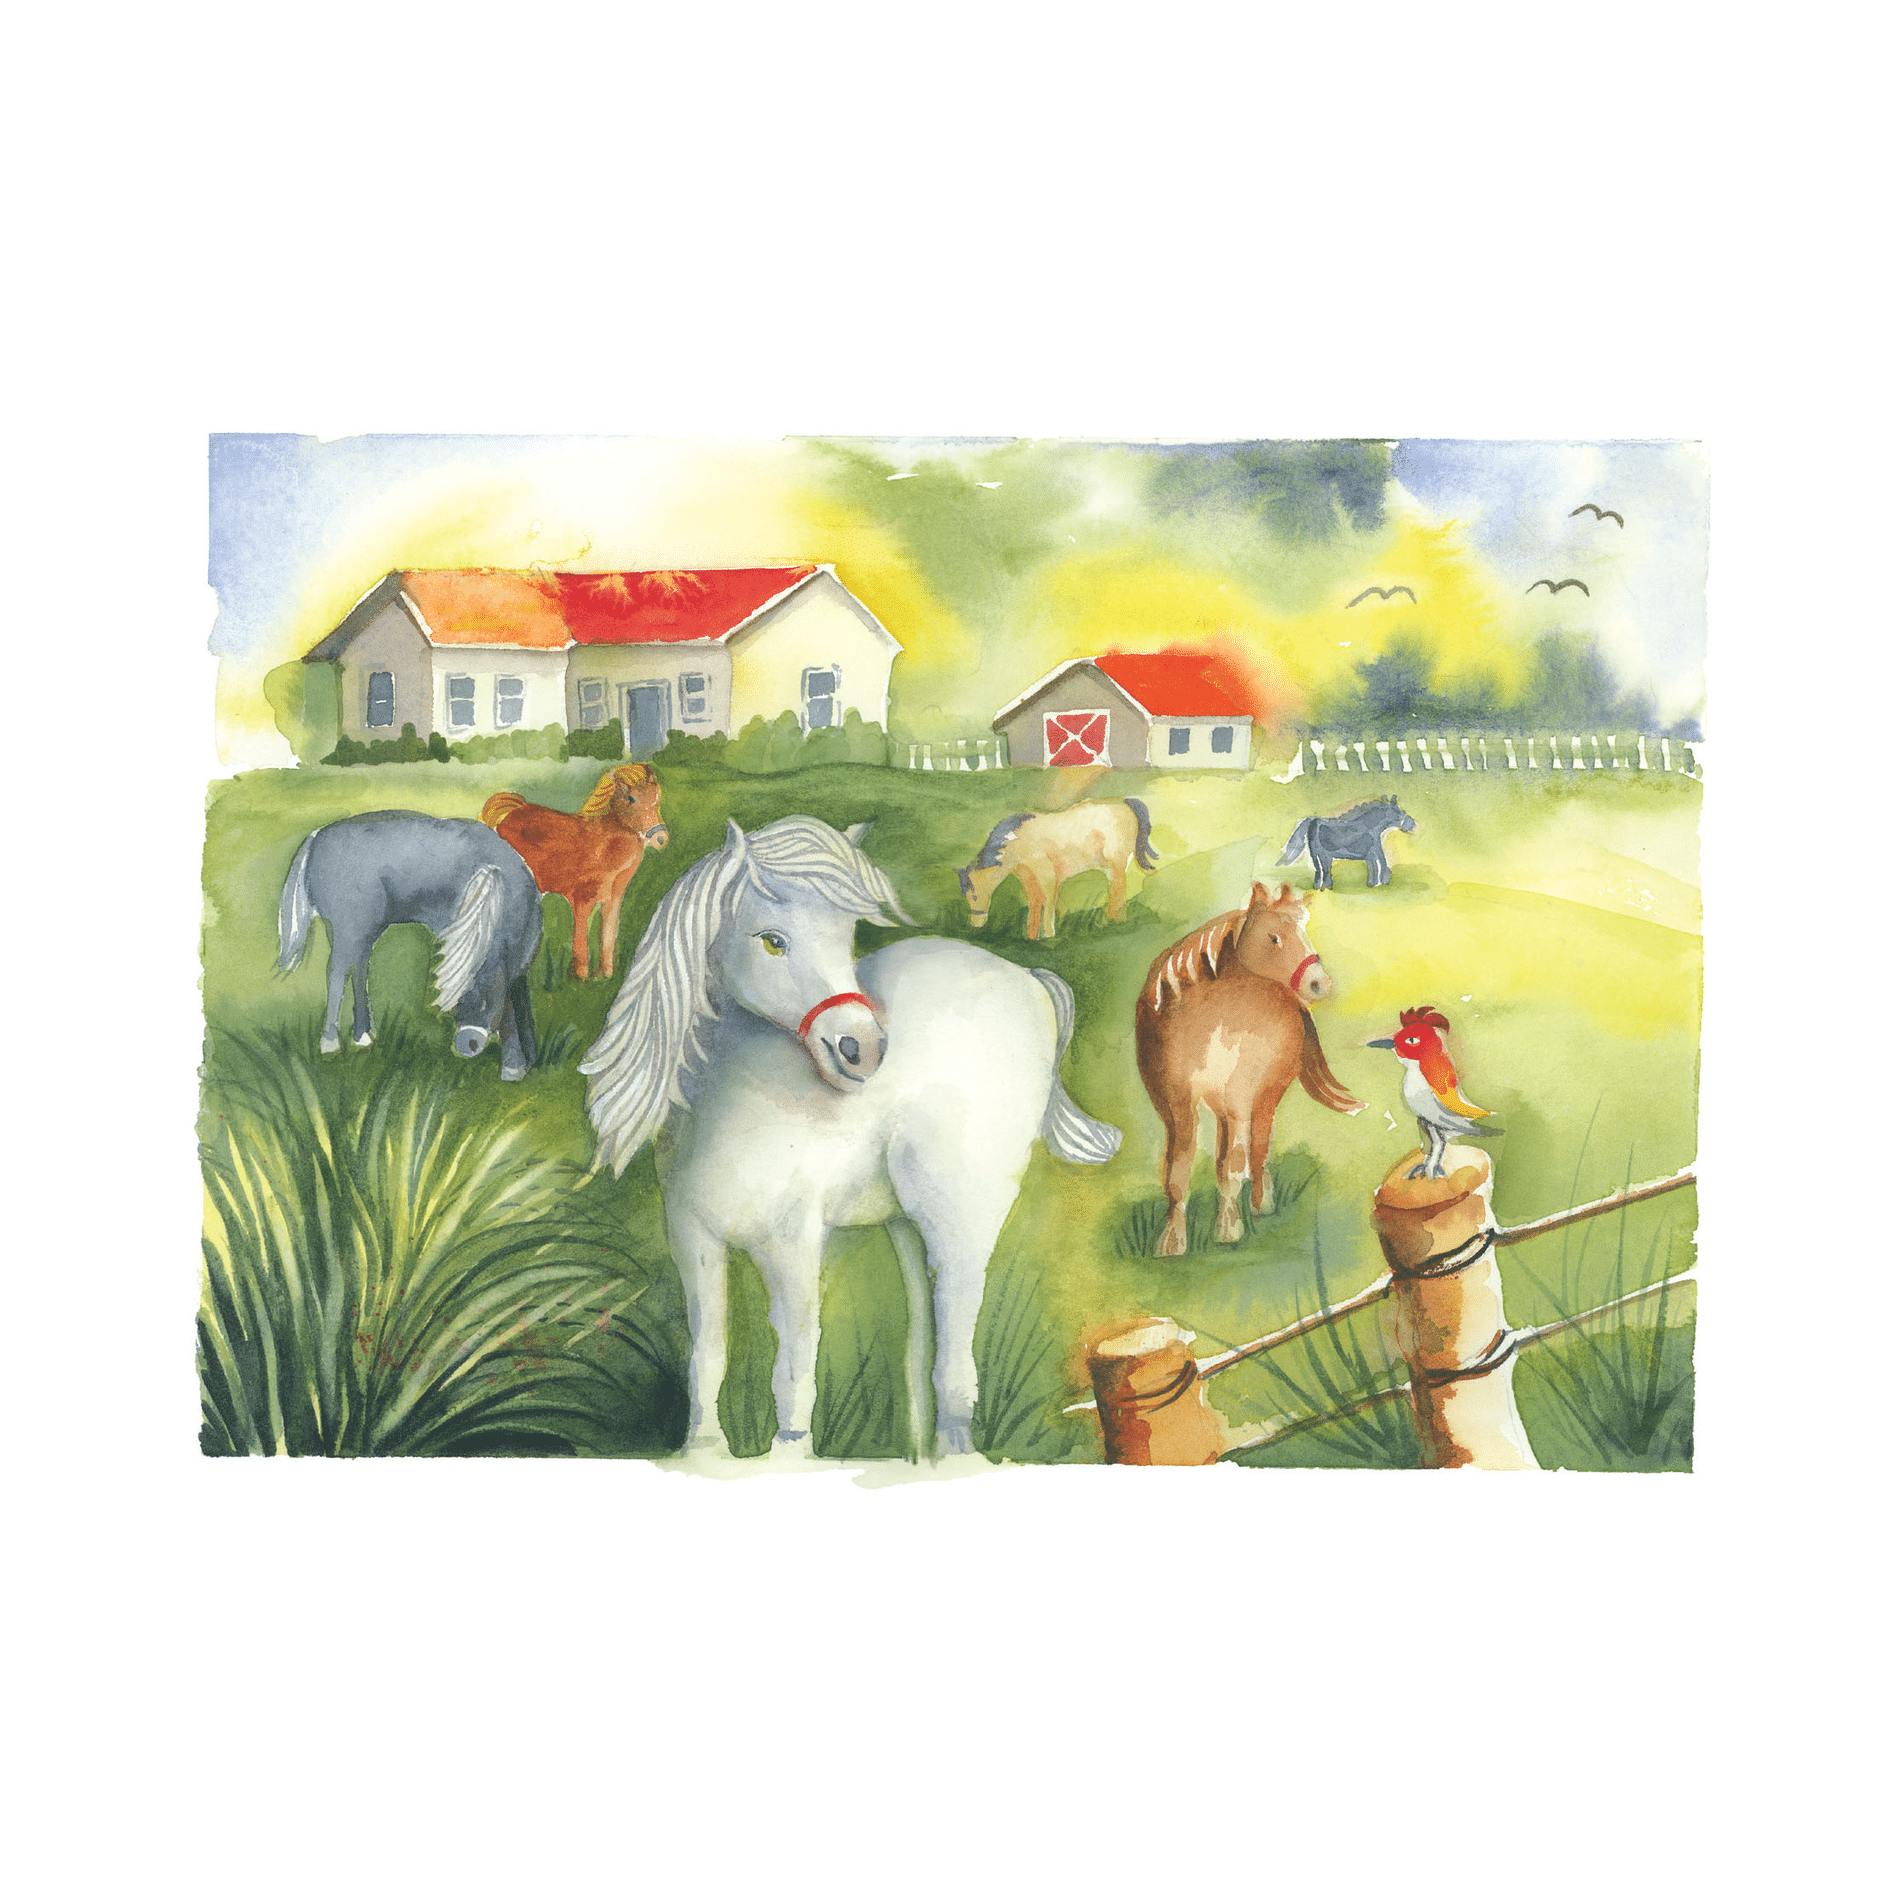 Kristin and the Pony - Notecard